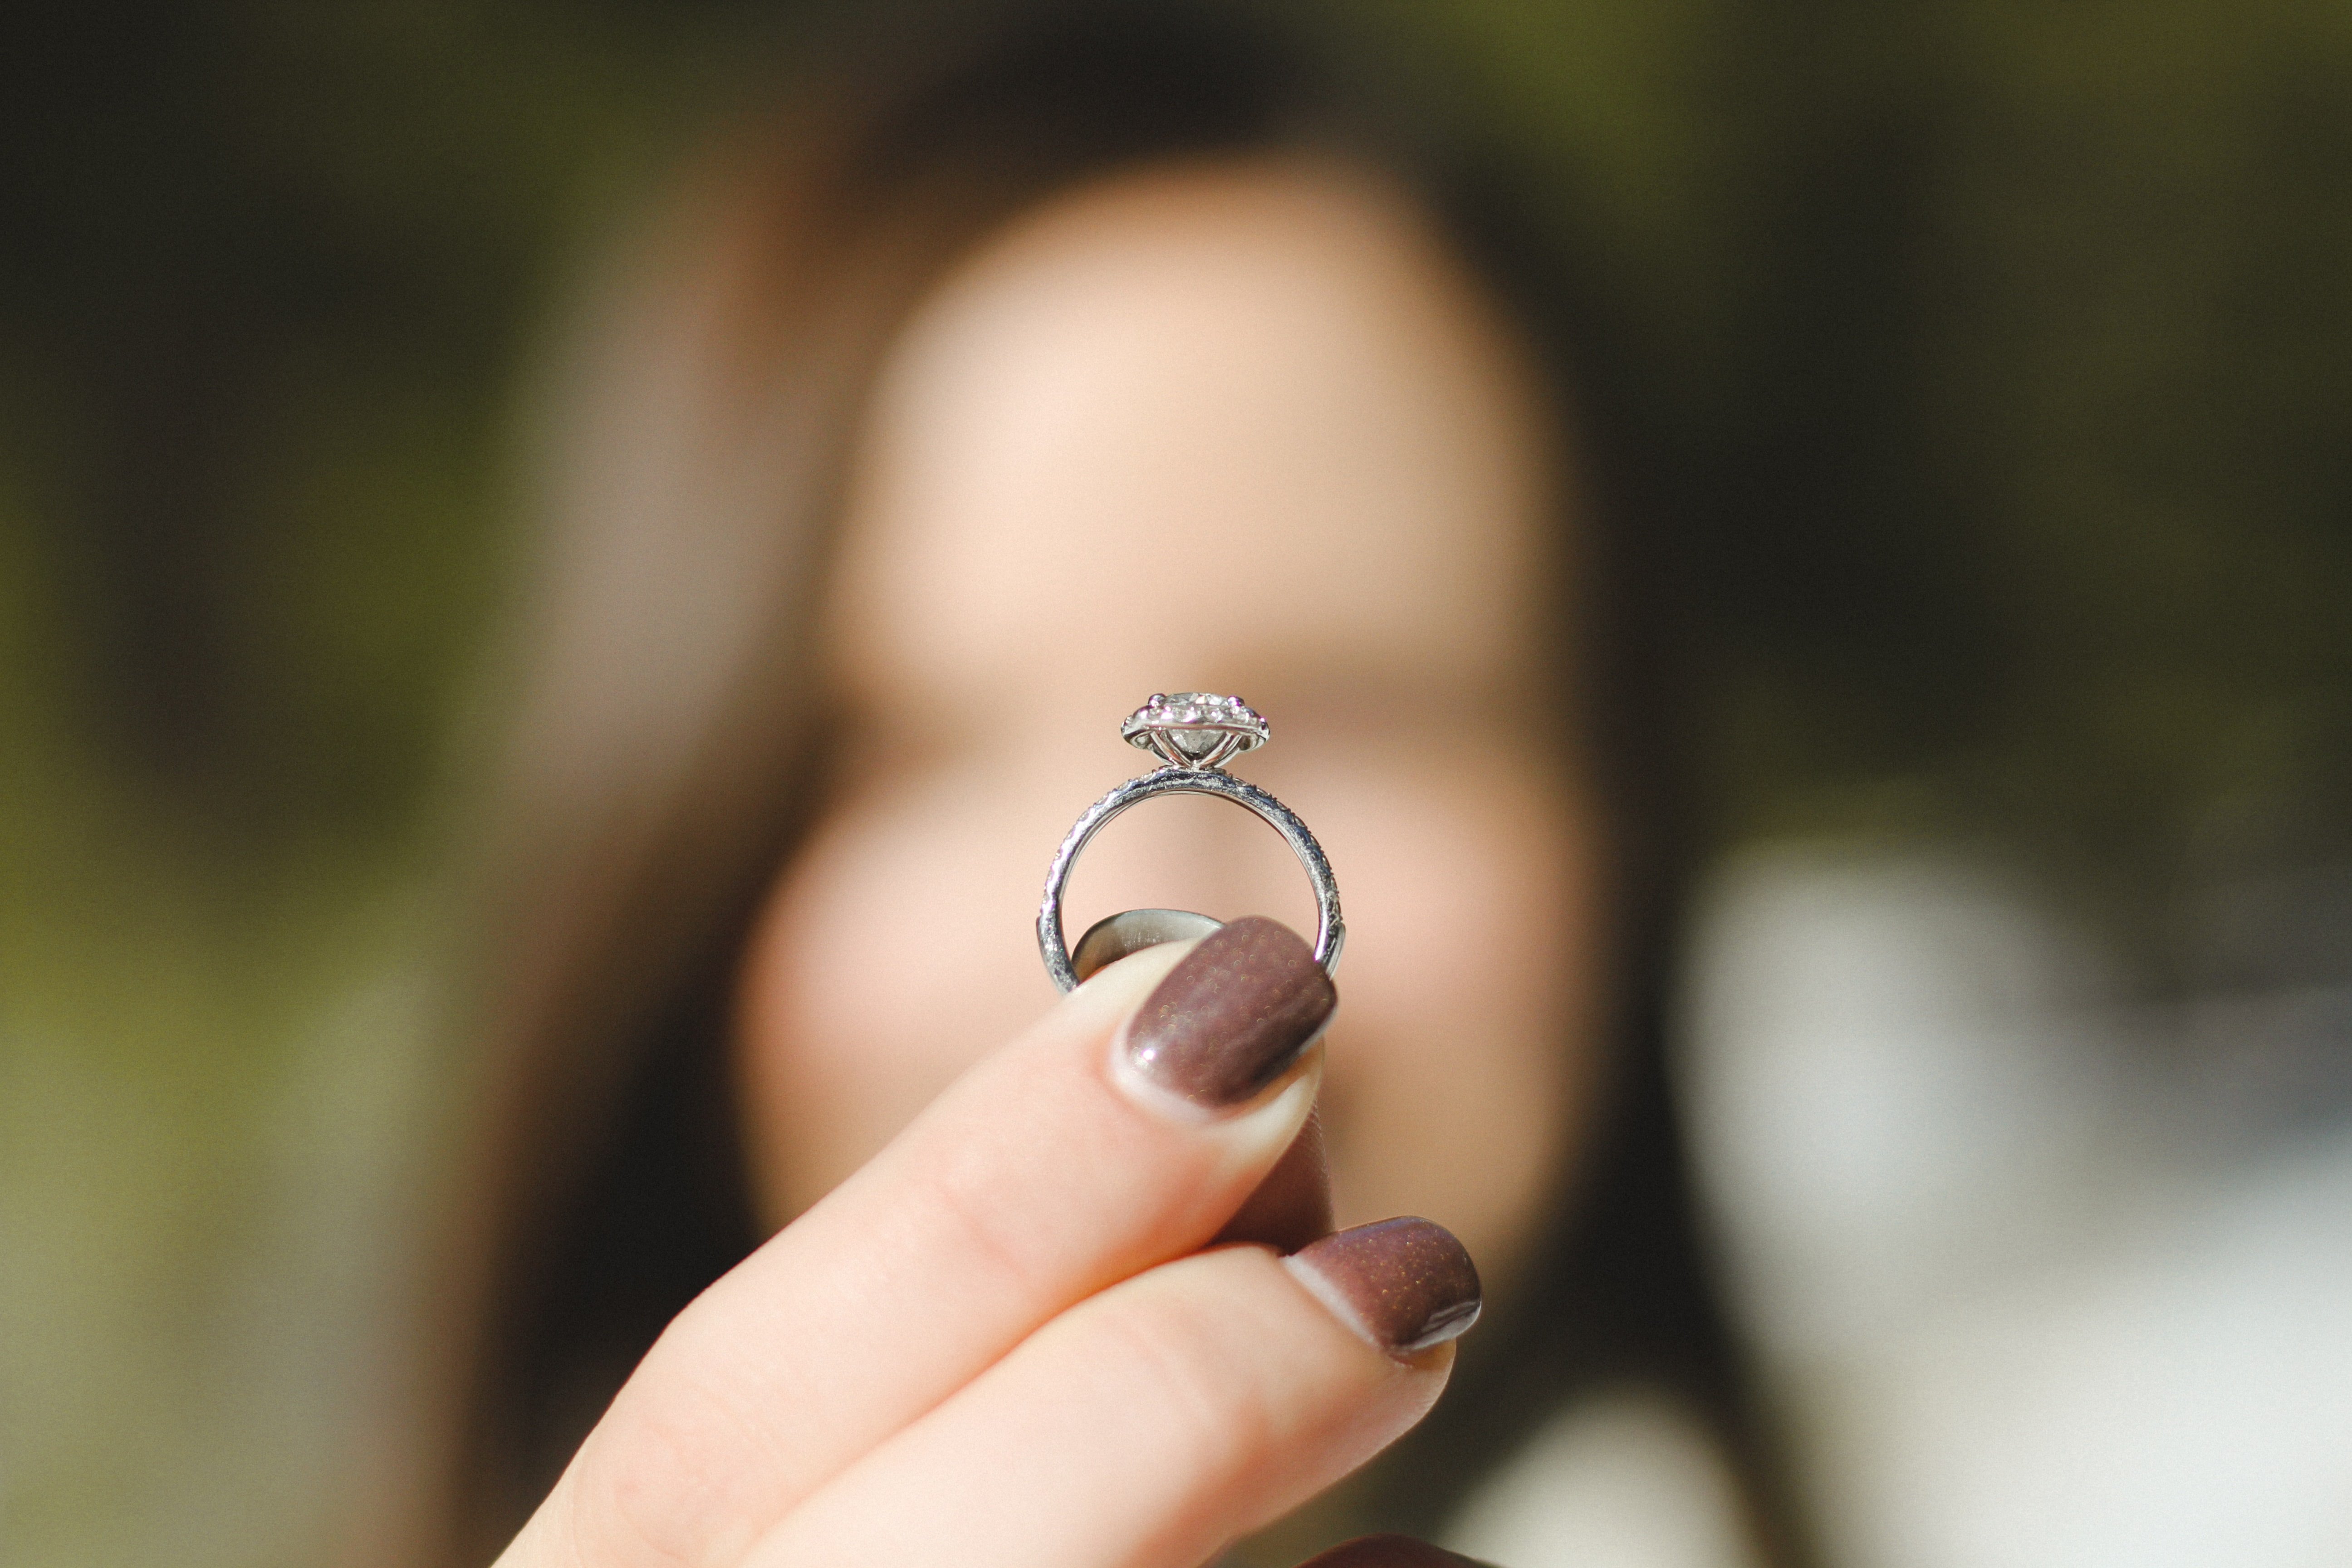 A lady holding up an engagement ring | Source: Pexels